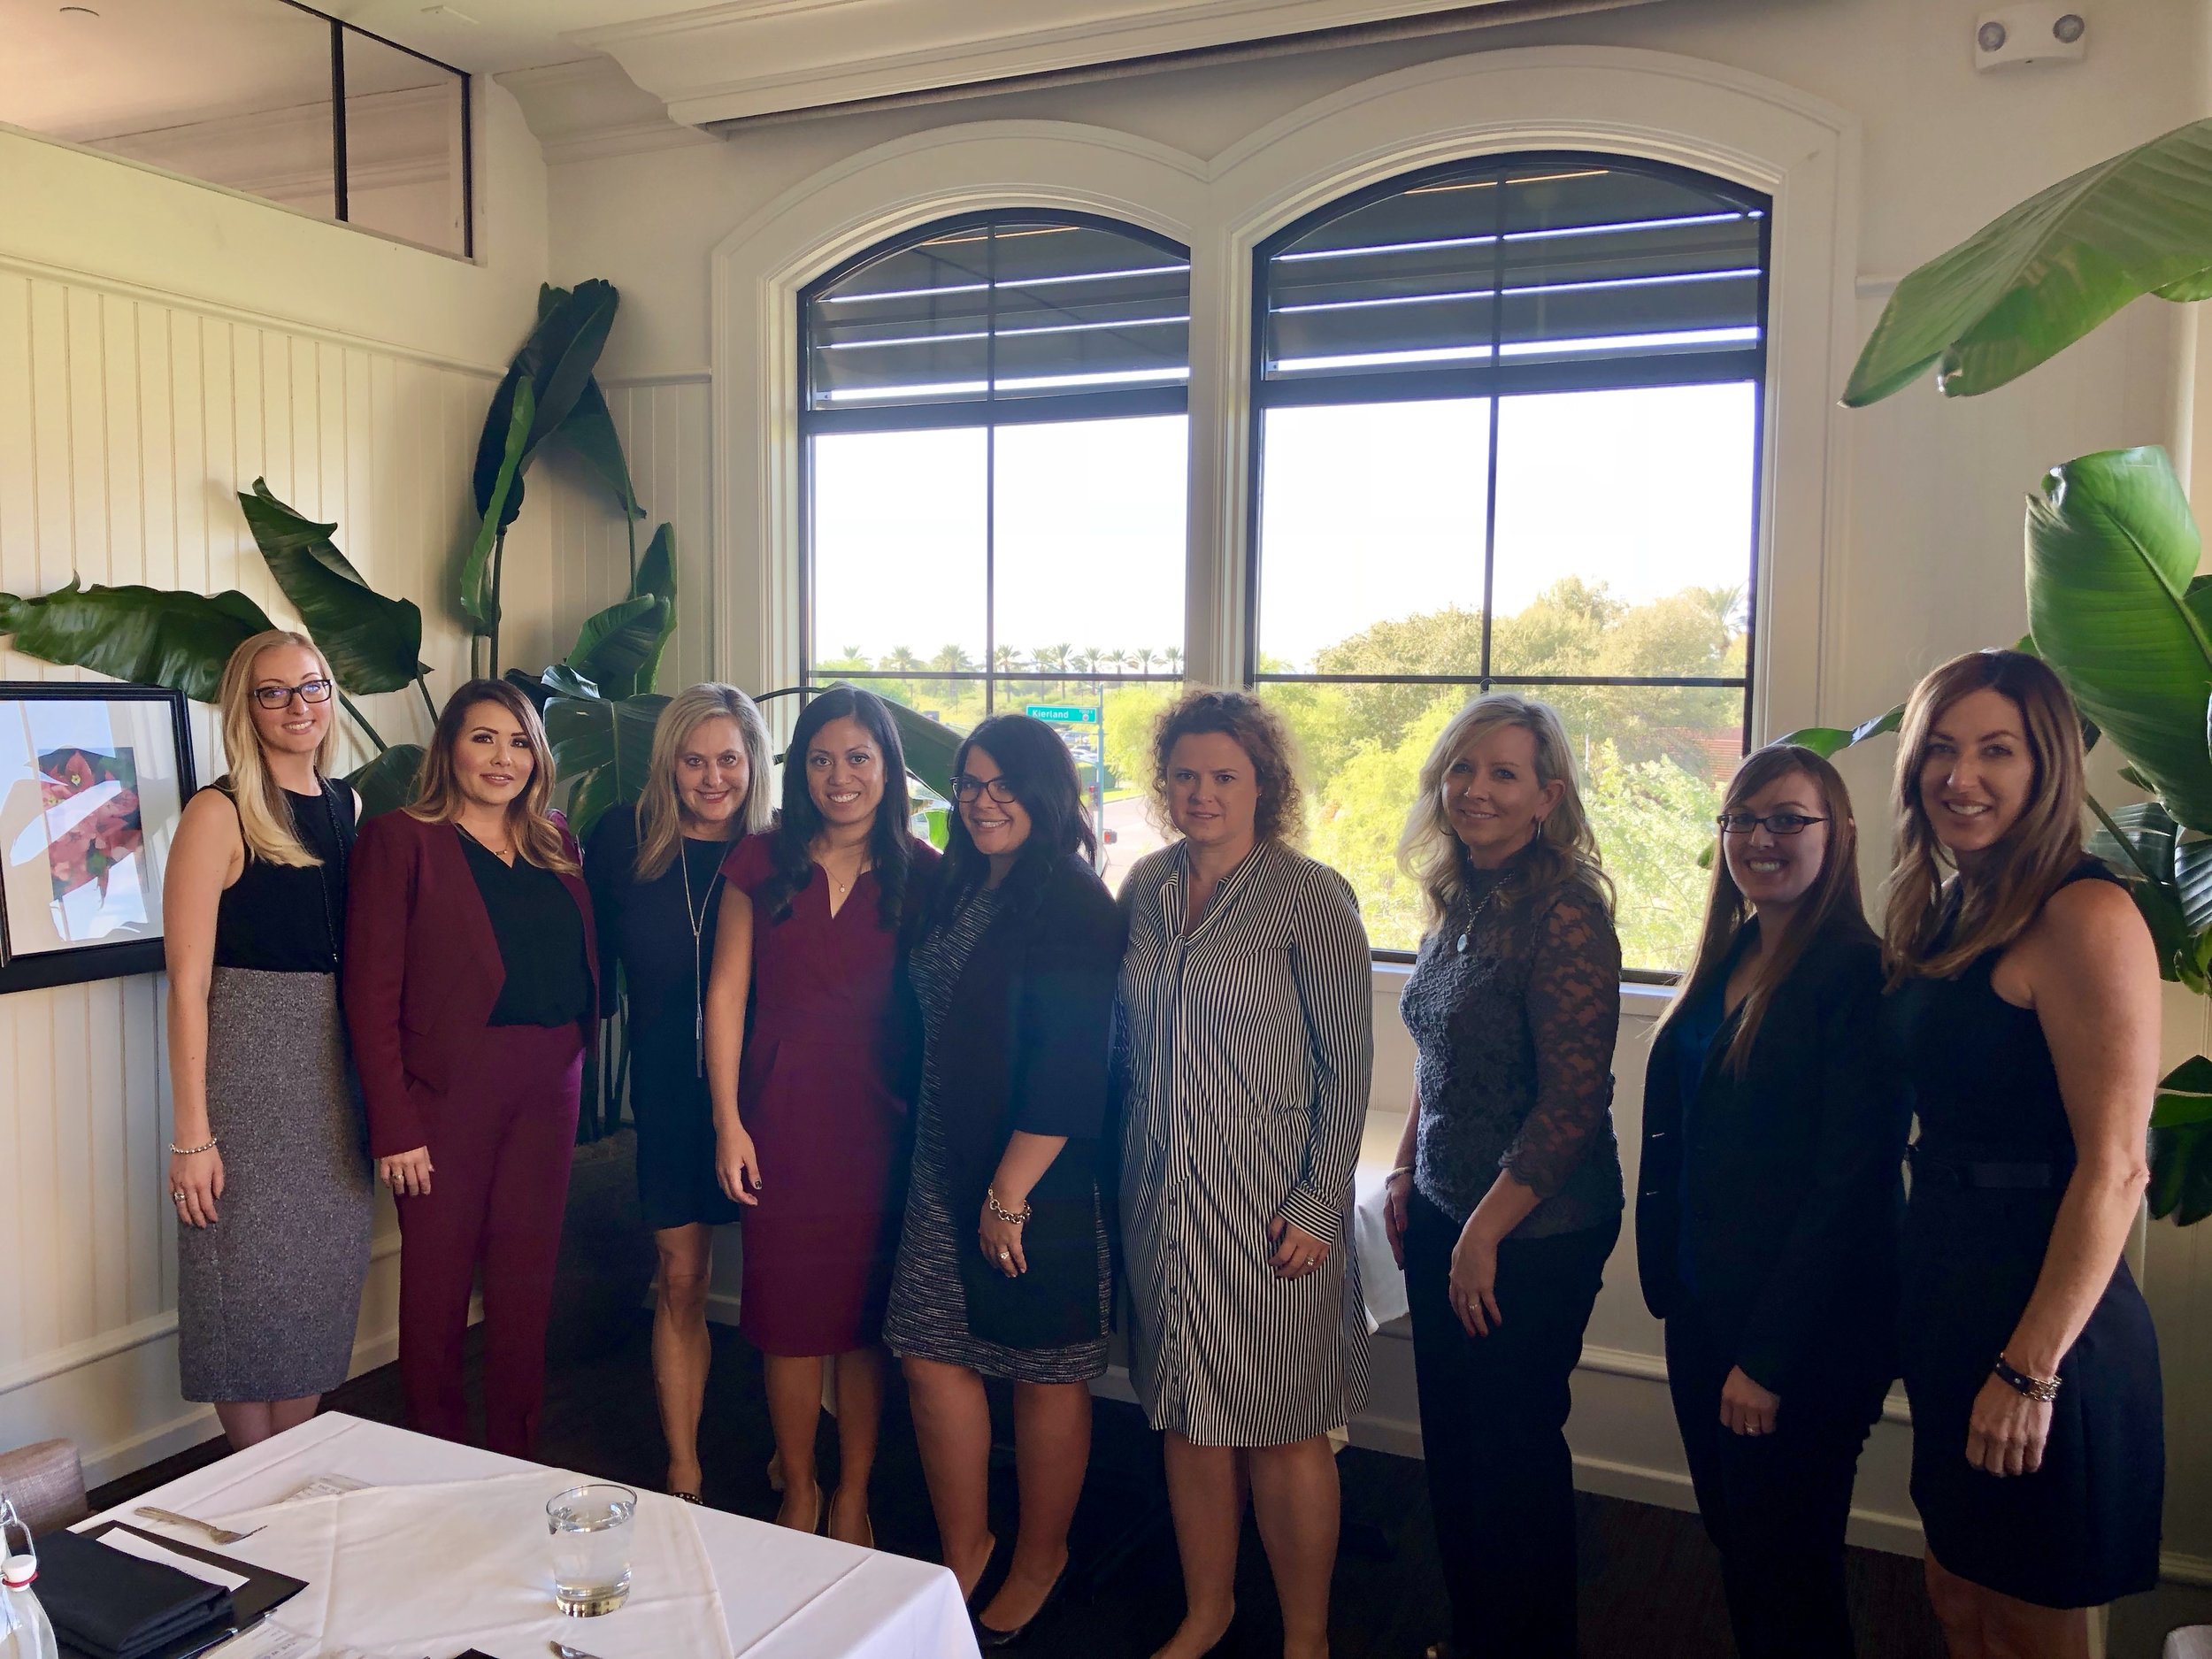  Pictured from left to right: Alissia Zenhausern, Angela Lowery, Lisa Payne, North Scottsdale Chapter Head Rea Mayer, Analise Zaremba, Unknown, Unknown, Unknown, and Susan Underwood. 